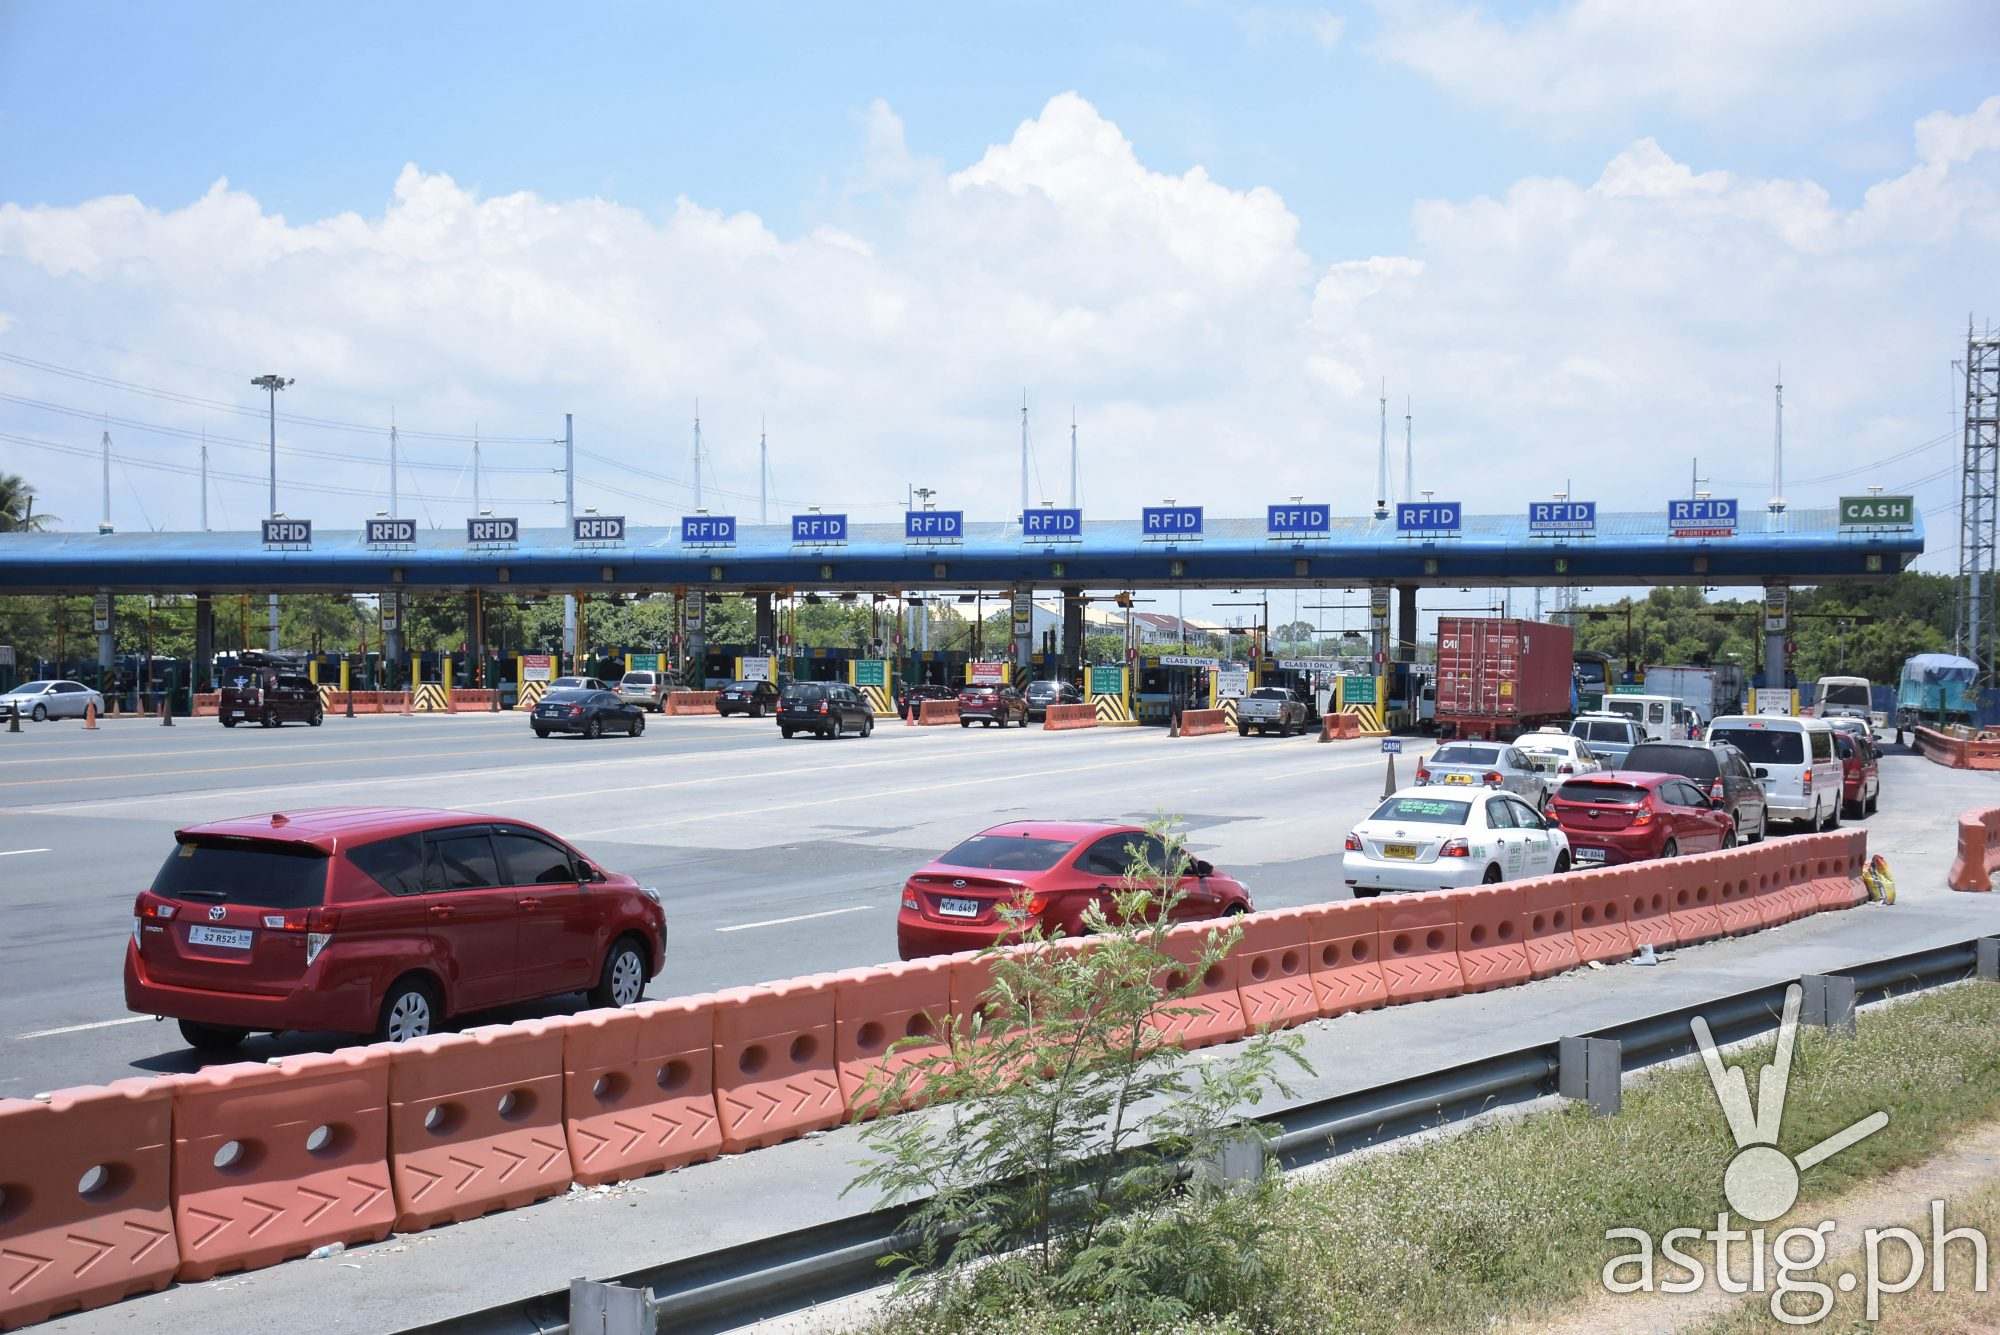 CAVITEX toll hike from August 21 | ASTIG.PH